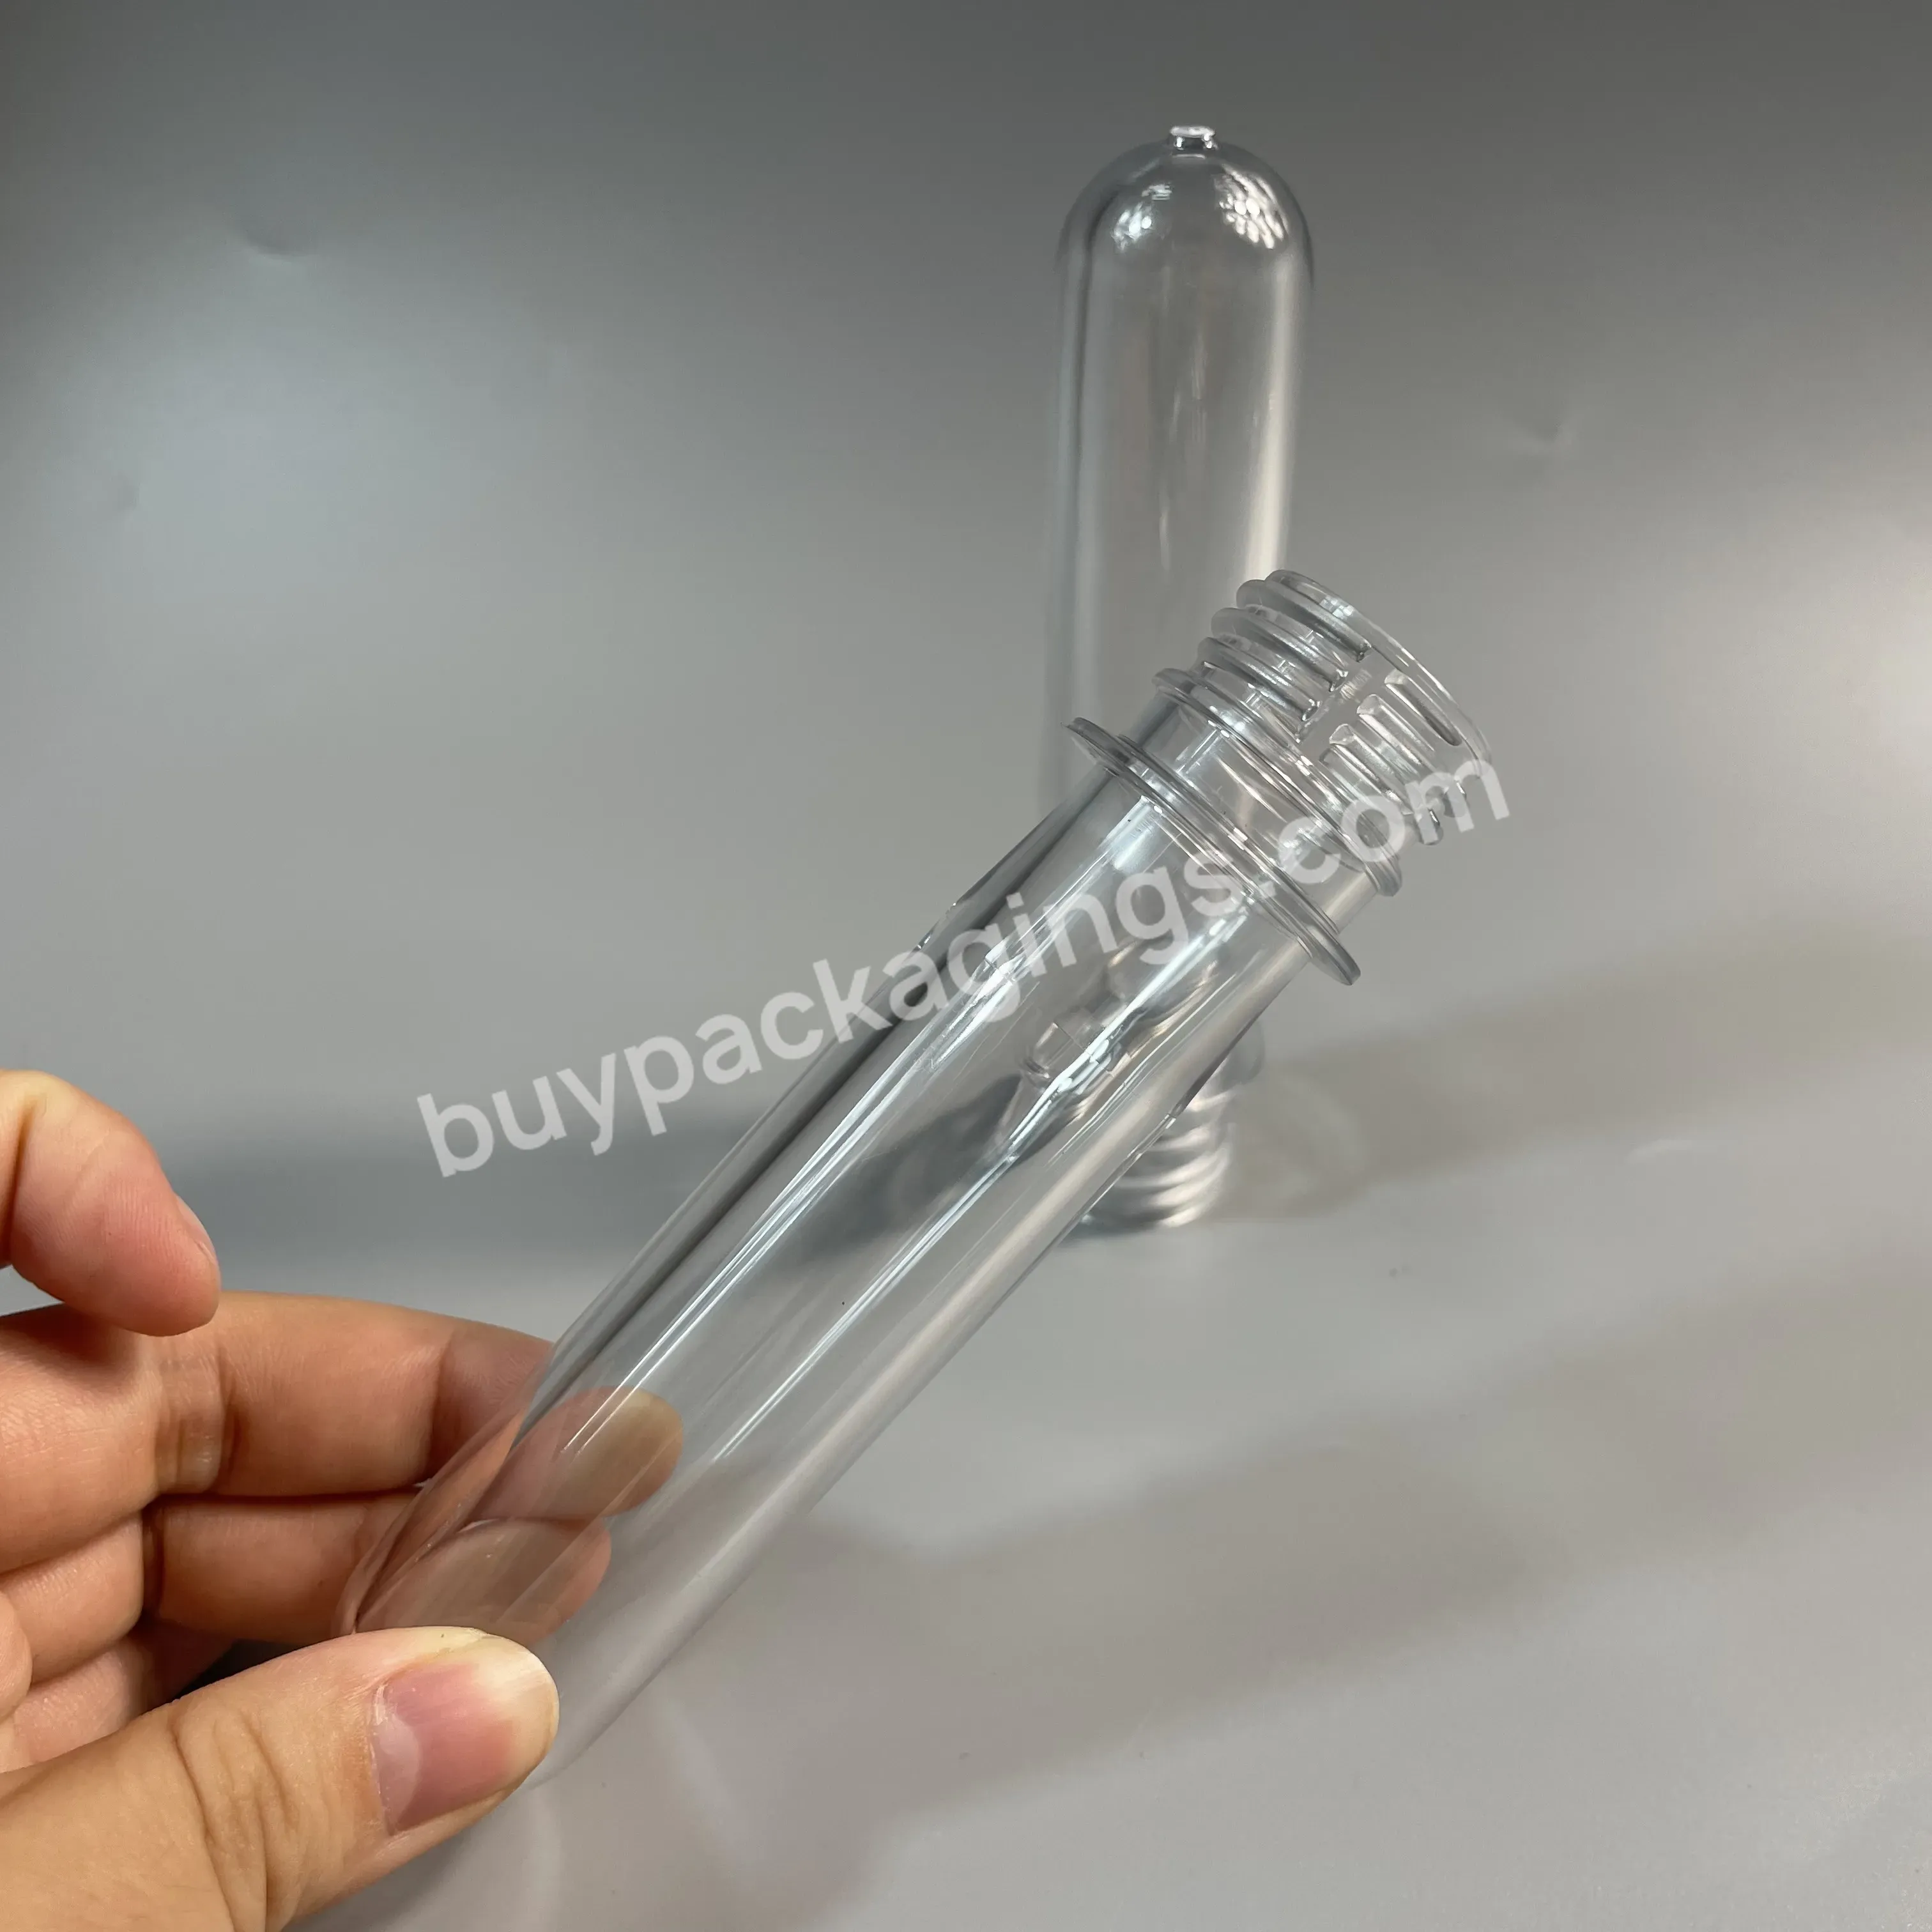 Preform Pco 1810 14g 22g 25g 36g 38g Preforms Water Bottle Raw Material Pet Preform 500ml For Water - Buy Water Bottle Pet Preform,28mm Pco 1881 Virgin Pet Preform High Quality Quick Shipping,28mm Pco Neck Pet Preform /plastic Water Bottle Preform/ P